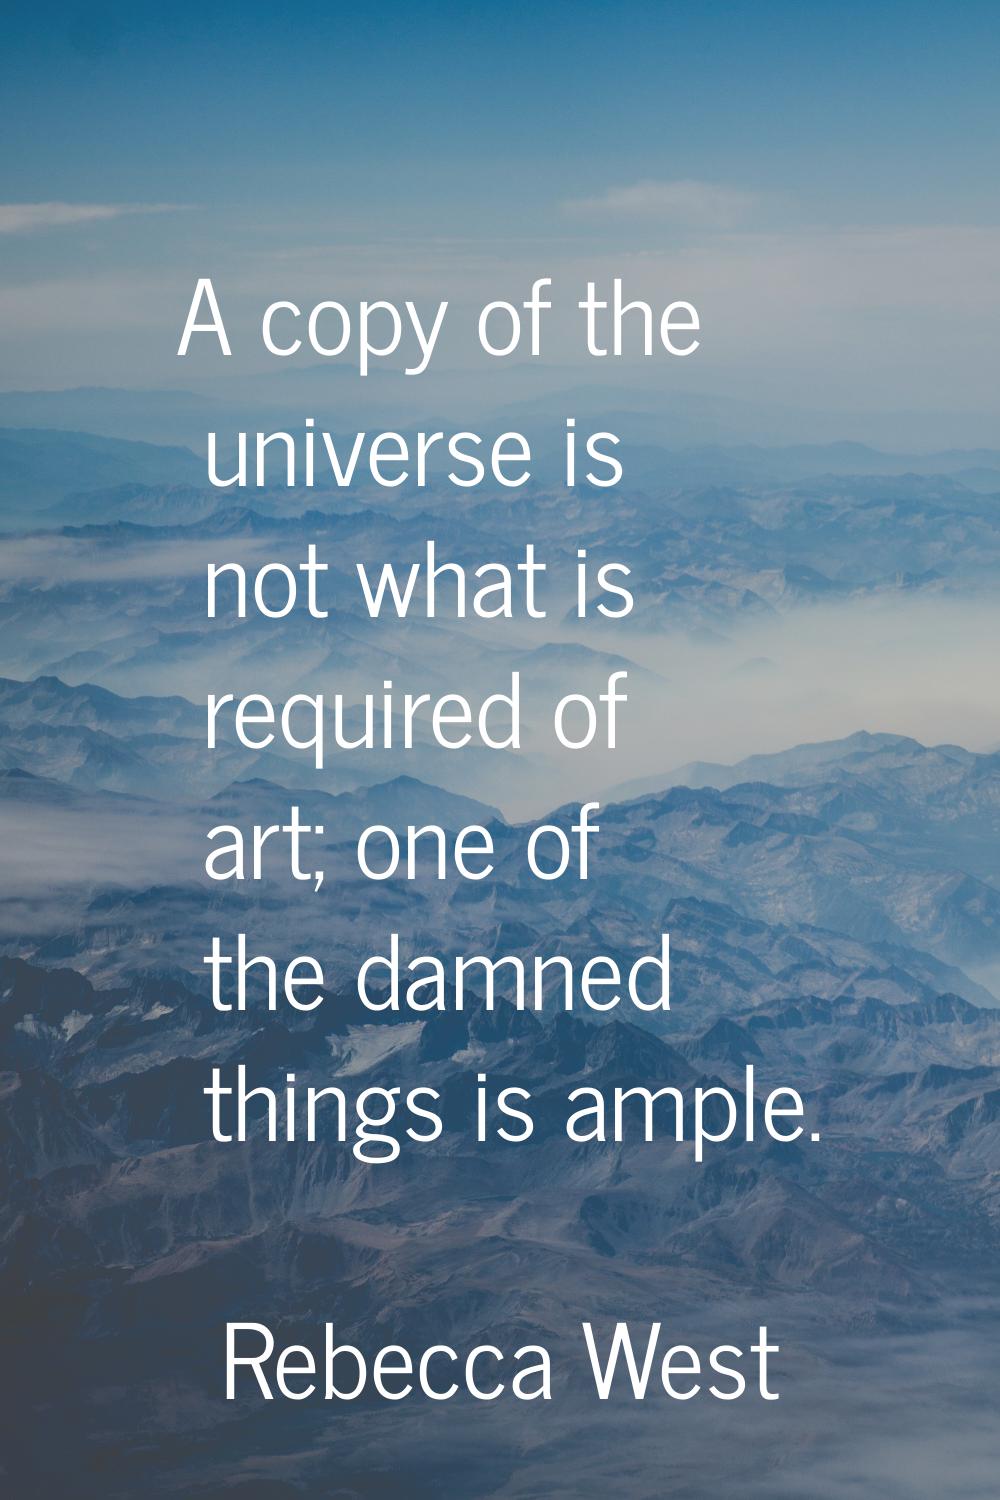 A copy of the universe is not what is required of art; one of the damned things is ample.